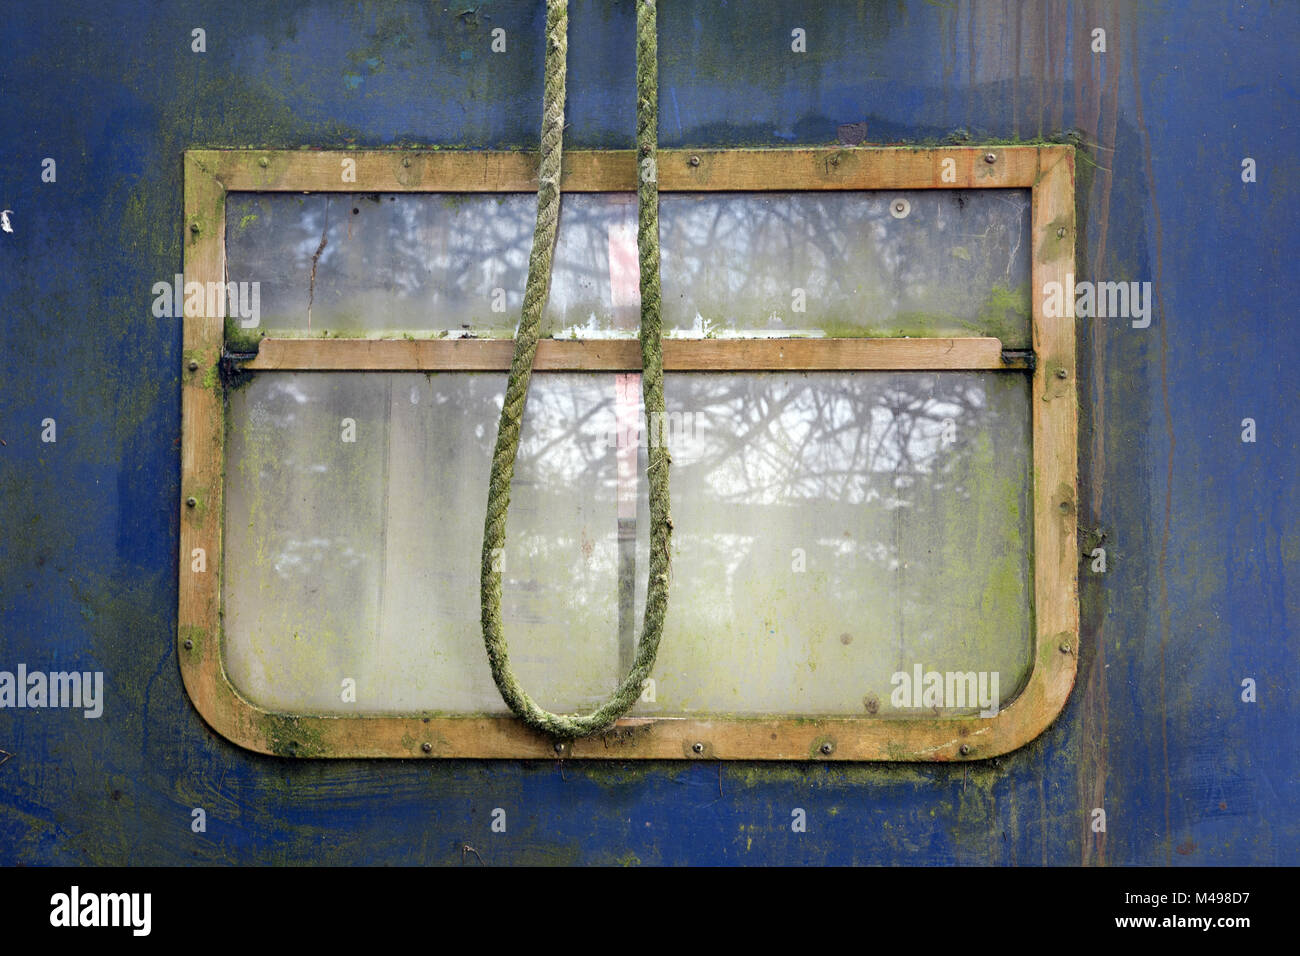 Rectangular brass window on old blue narrowboat with mooring rope, Grand Union Canal, Marsworth, Tring, UK. Stock Photo